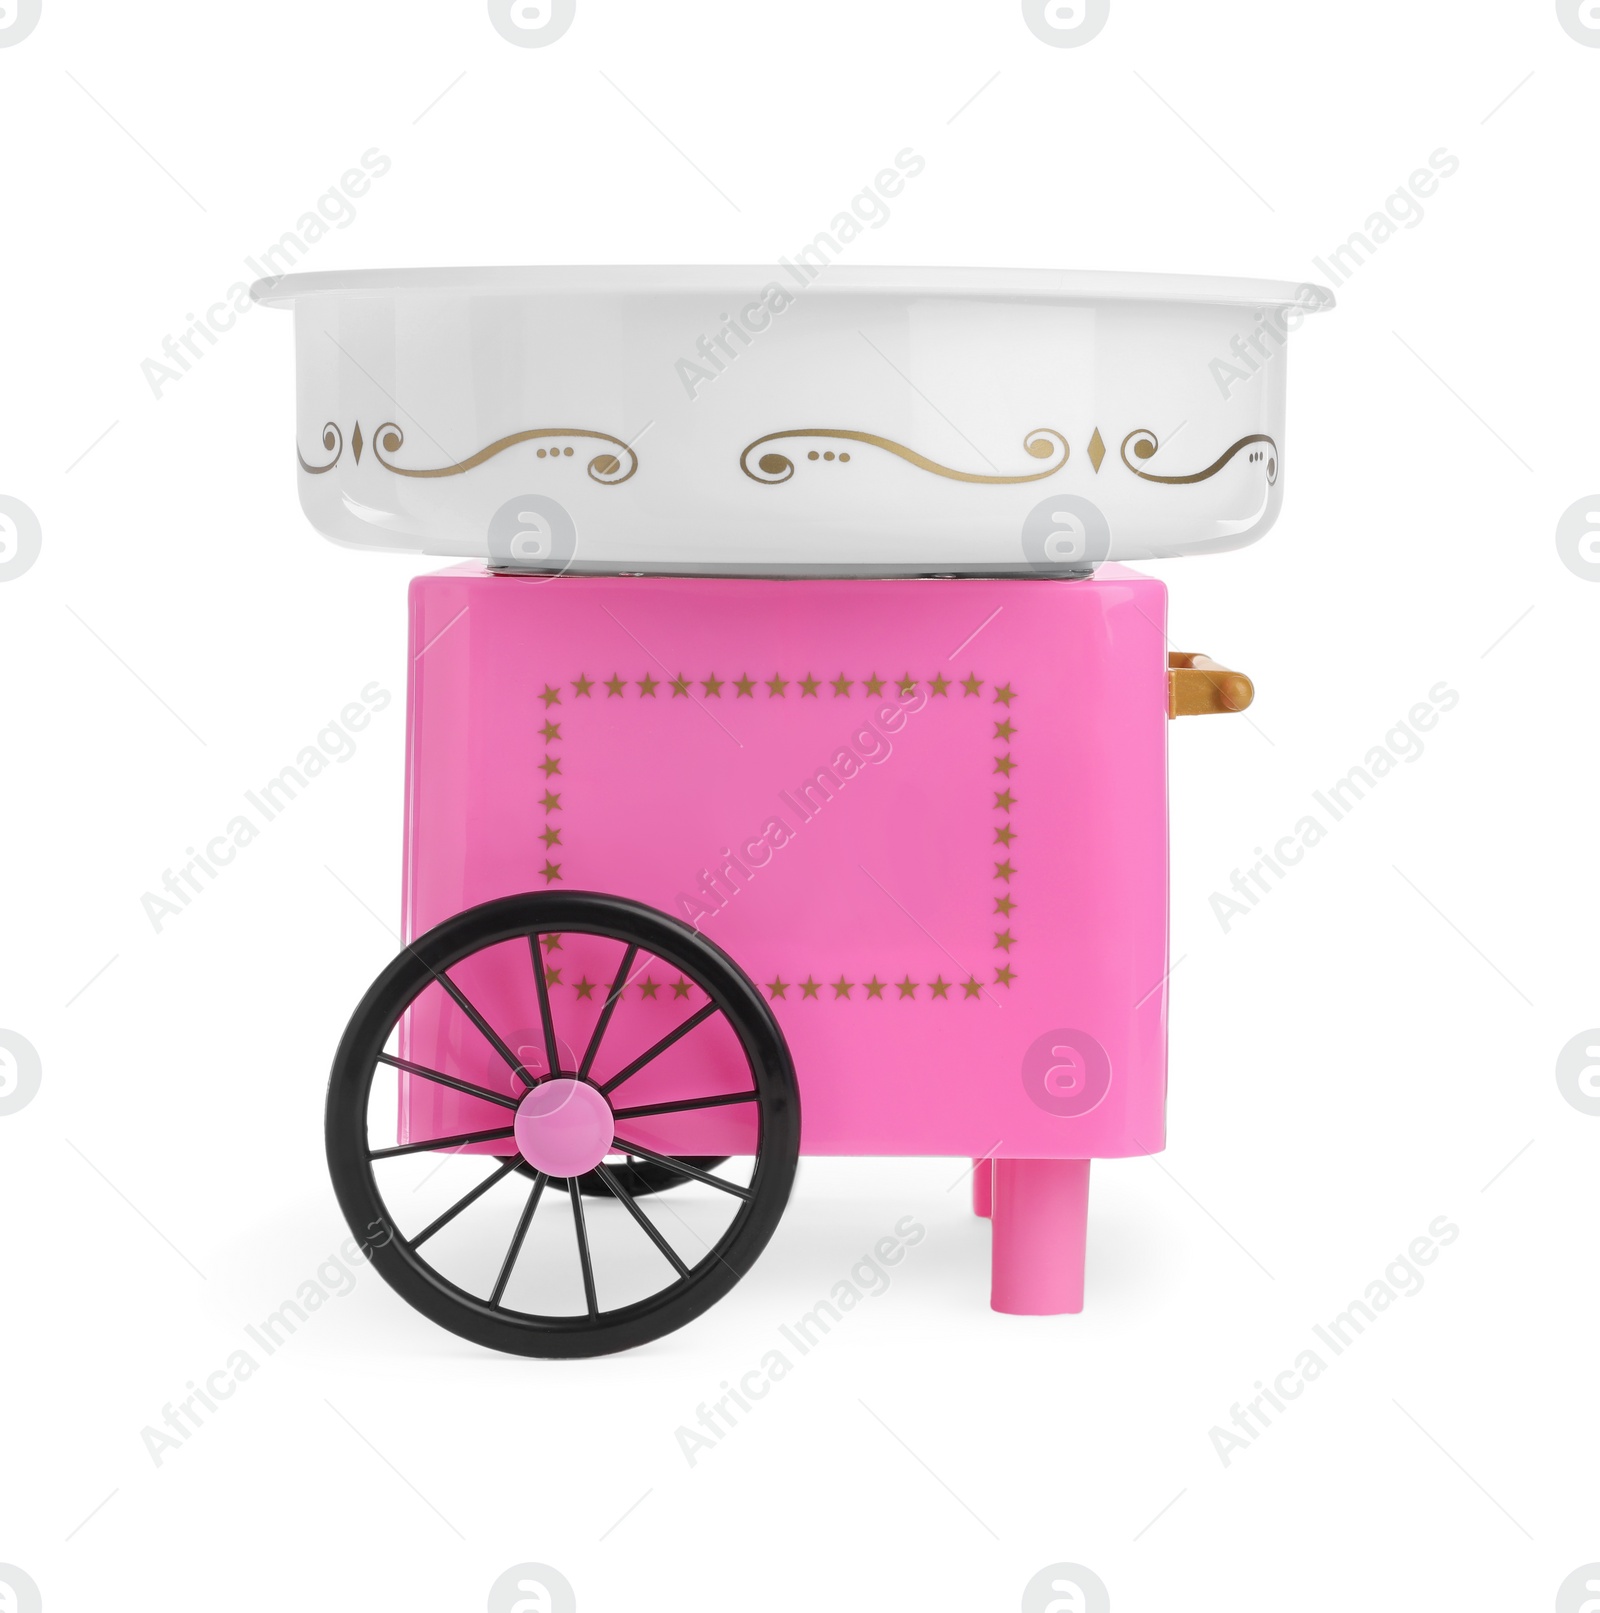 Photo of Portable candy cotton machine isolated on white